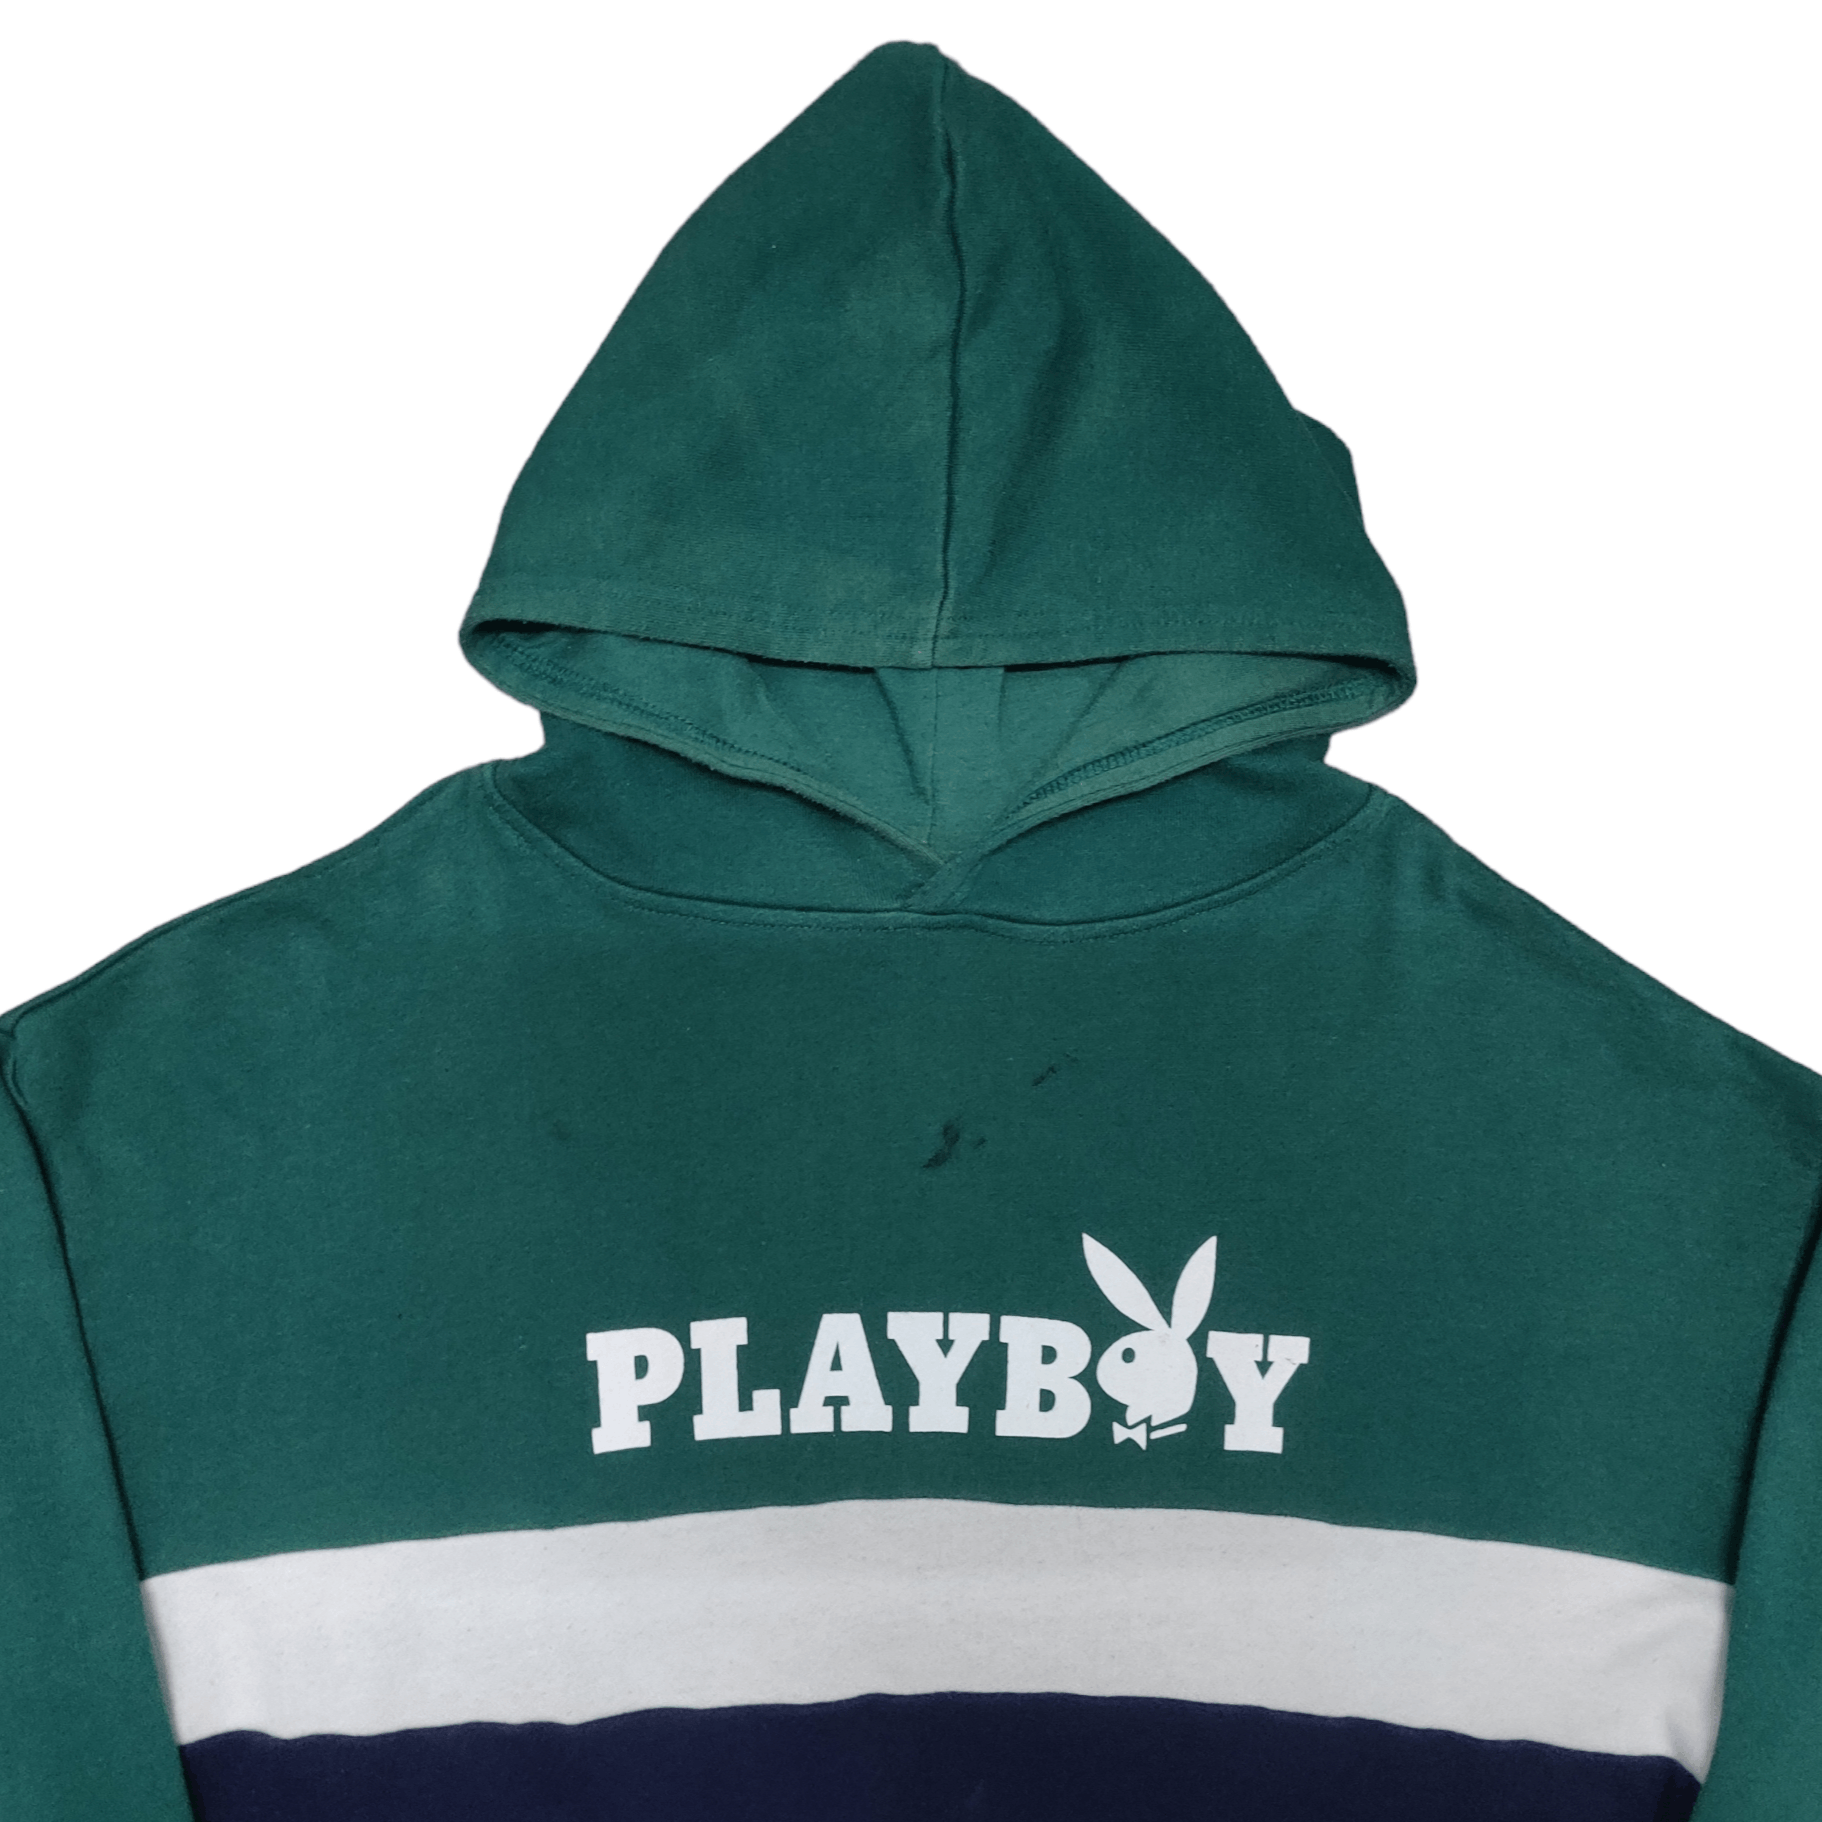 Playboy Playboy Bunny Hoodie Jumper Size US M / EU 48-50 / 2 - 2 Preview